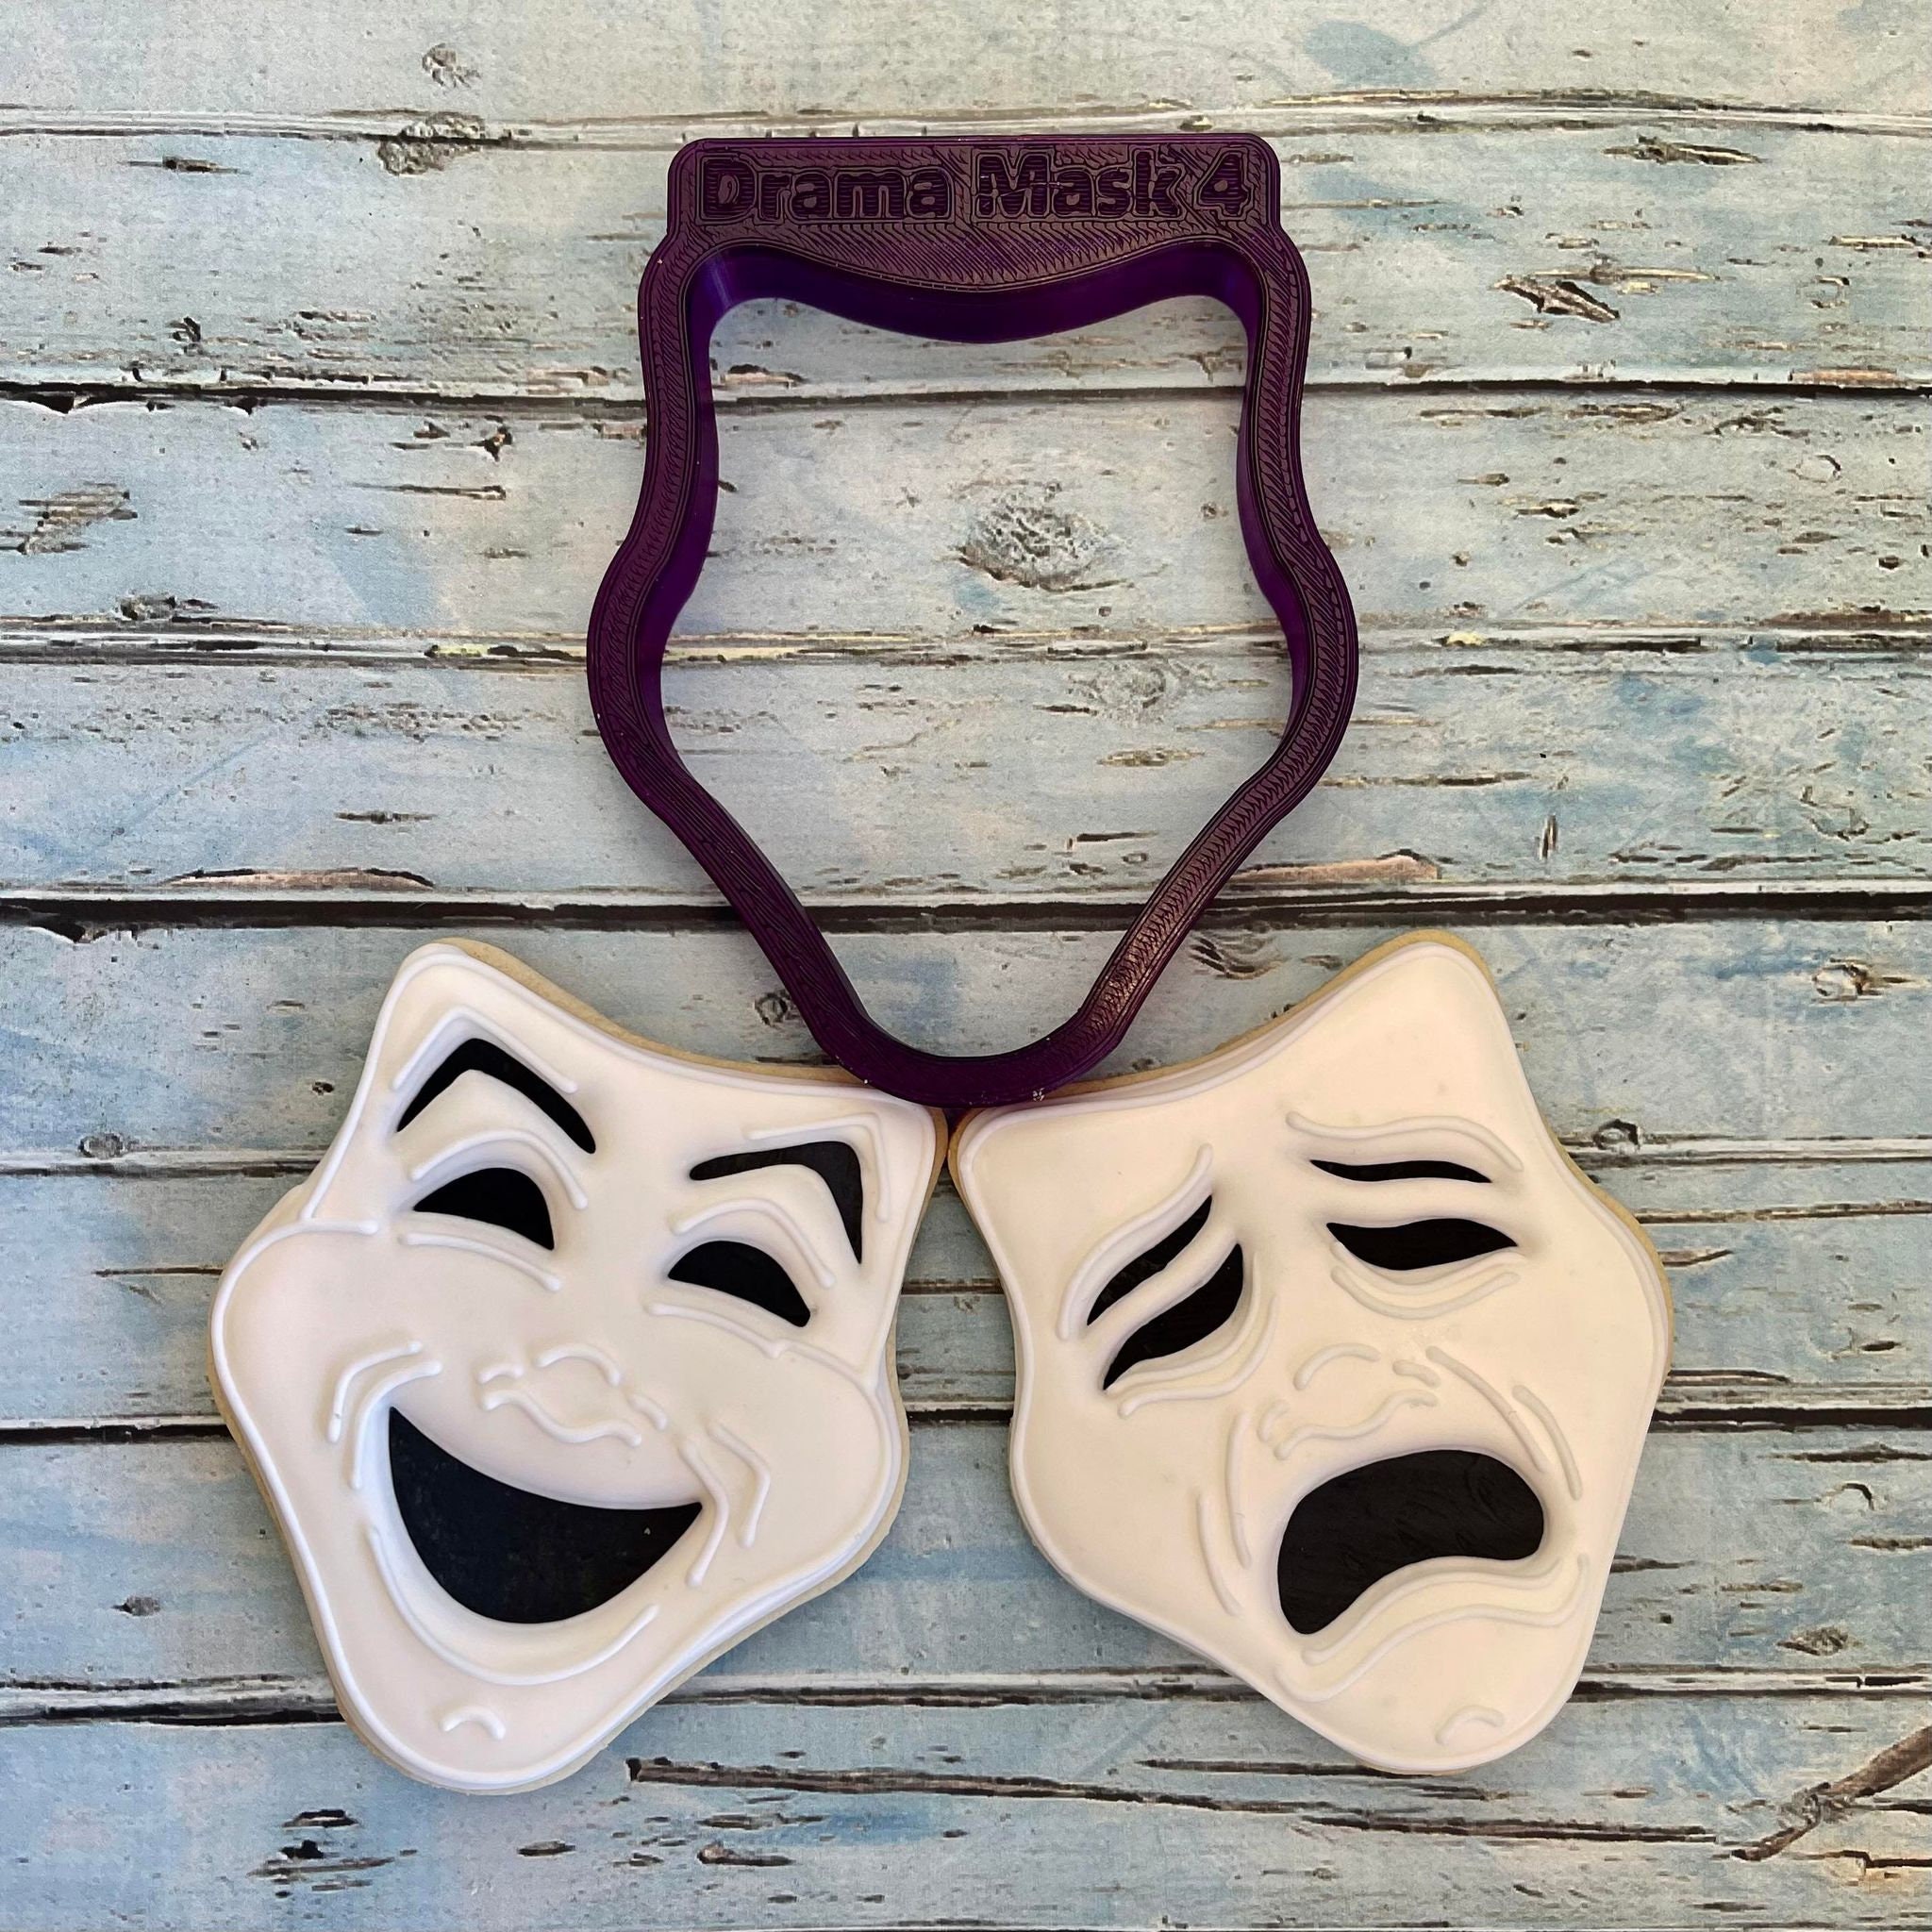 Comedy Tragedy Mask' Water Bottle